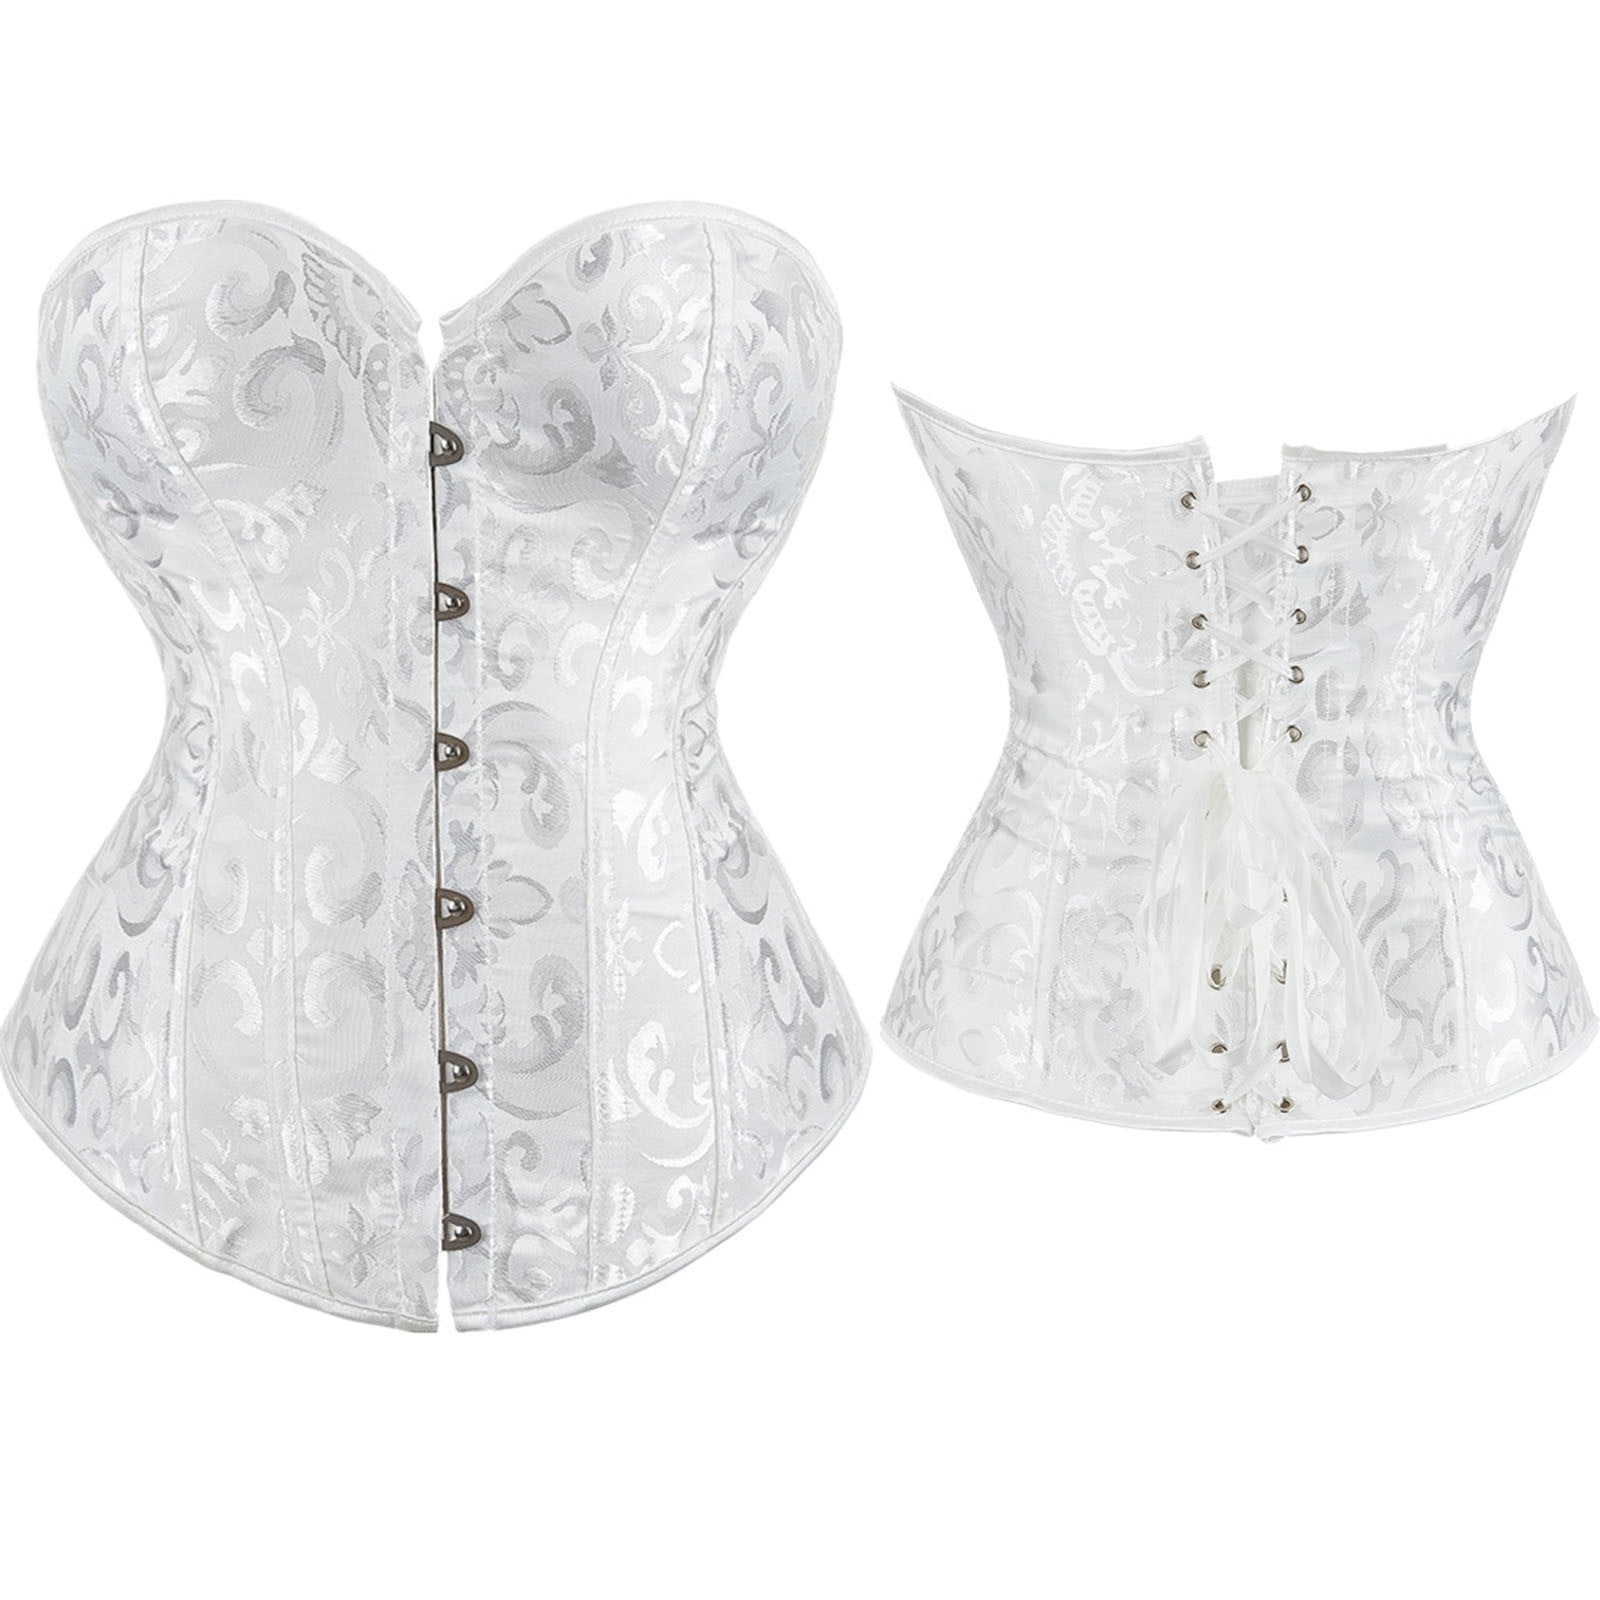 Ecqkame Women's Sexy Vintage Underbust Corset Bustier Clearance Fashion  Women's Plus Size Boned Corsets Shapewear Outfit Solid Sexy Underwear